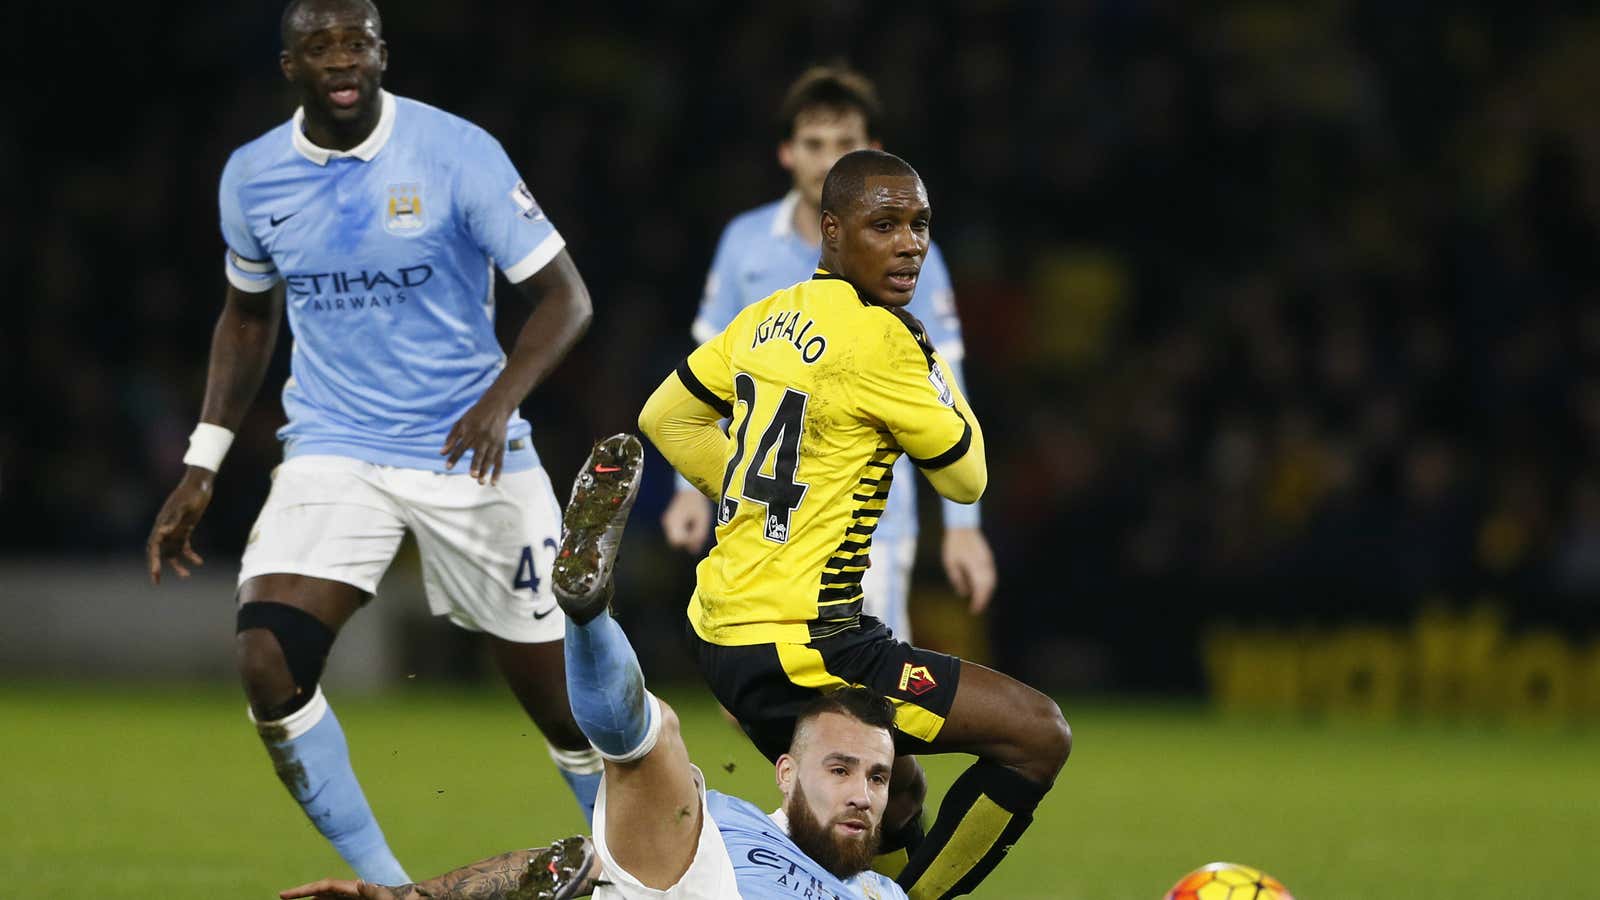 Manchester City’s Yaya Toure looks on Watford’s Odion Ighalo takes on his teammate. They are two of the EPL’s African star players.